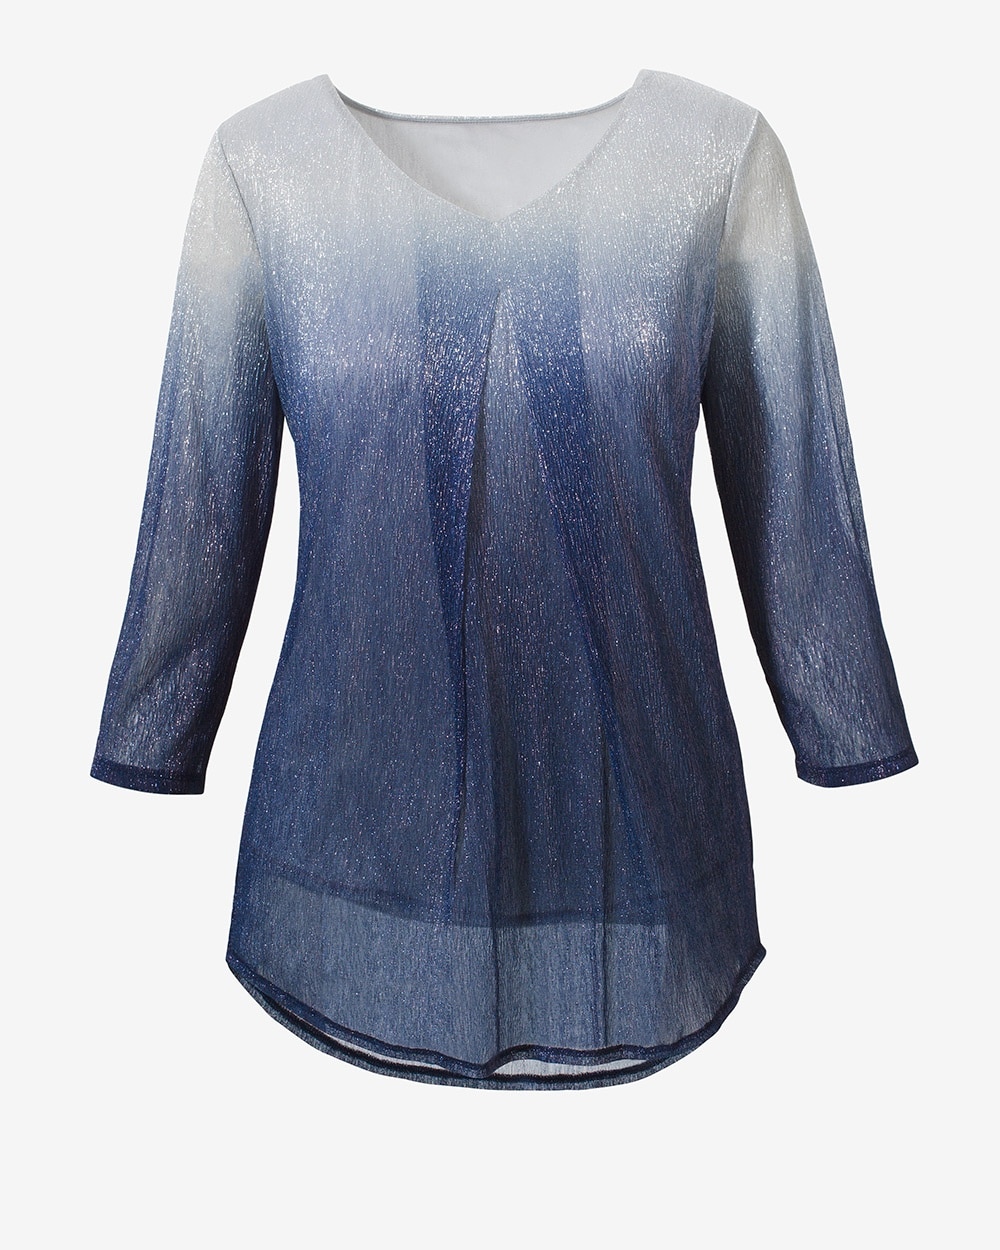 Easywear Shimmer Ombre 3/4-Sleeve Tunic